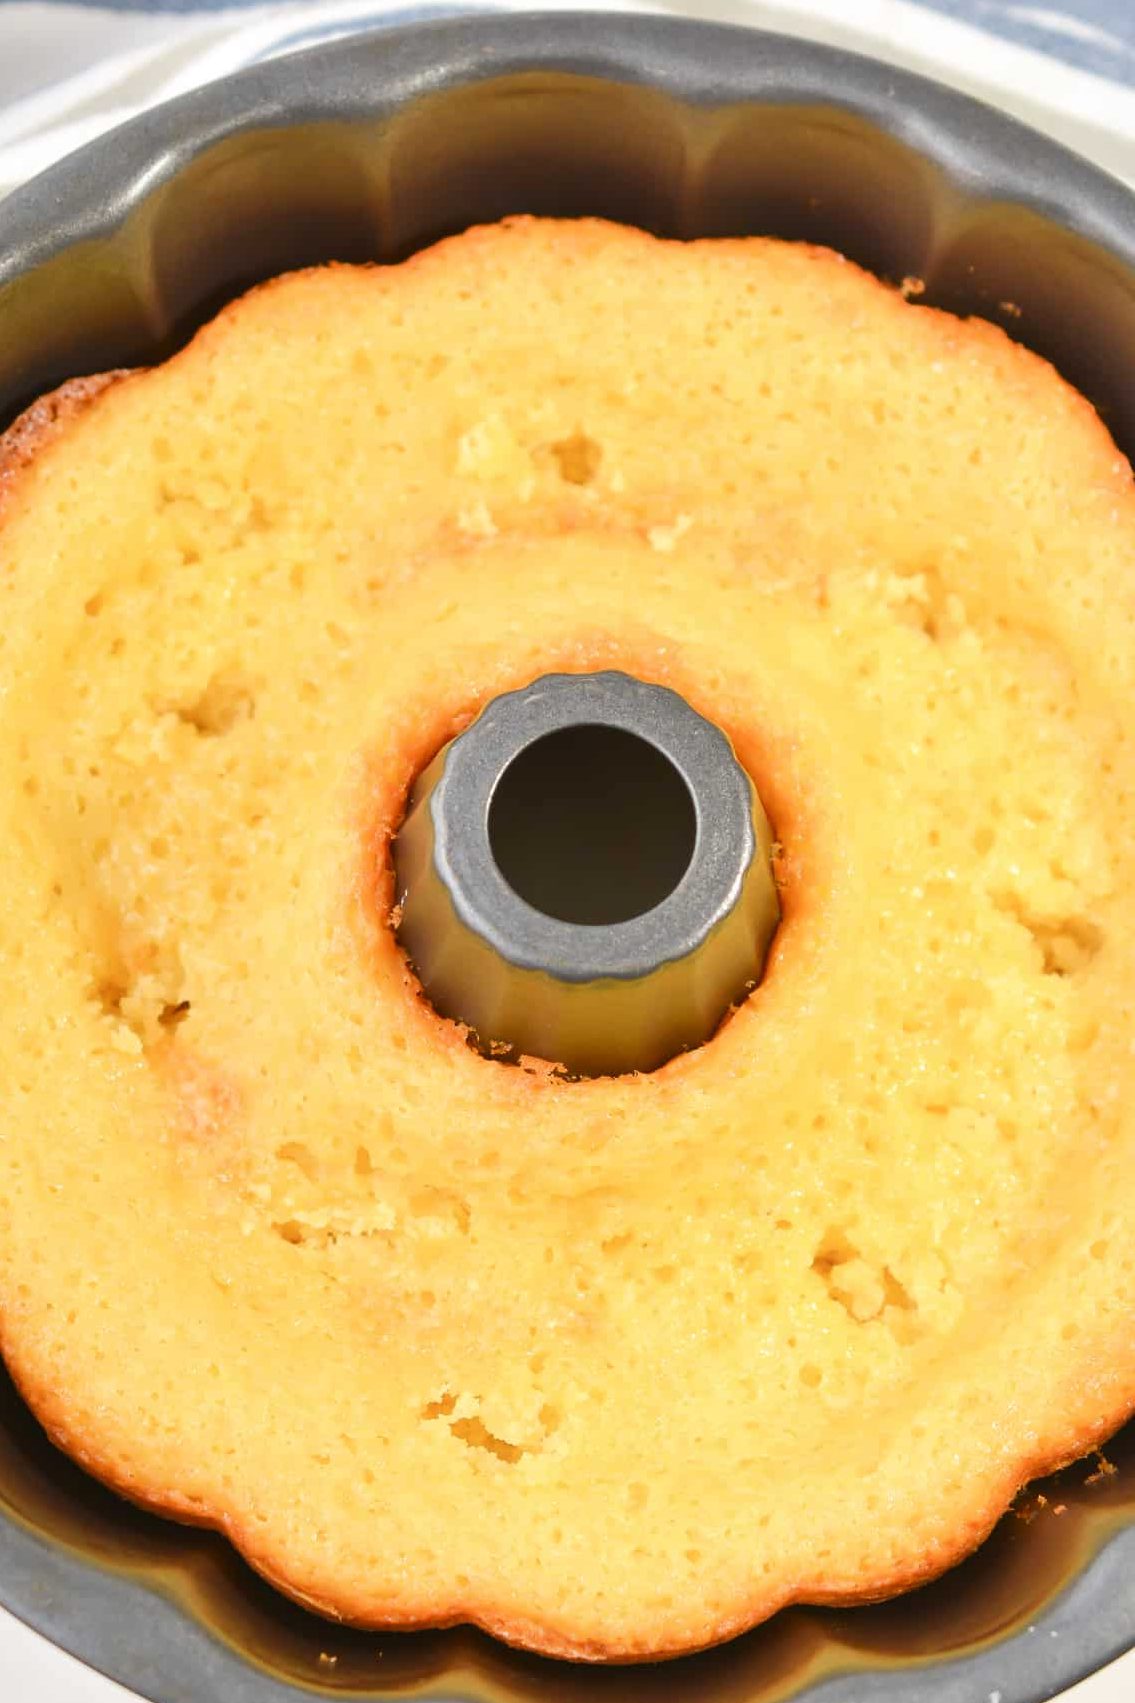 use the end of a butter knife to poke holes in the cake.